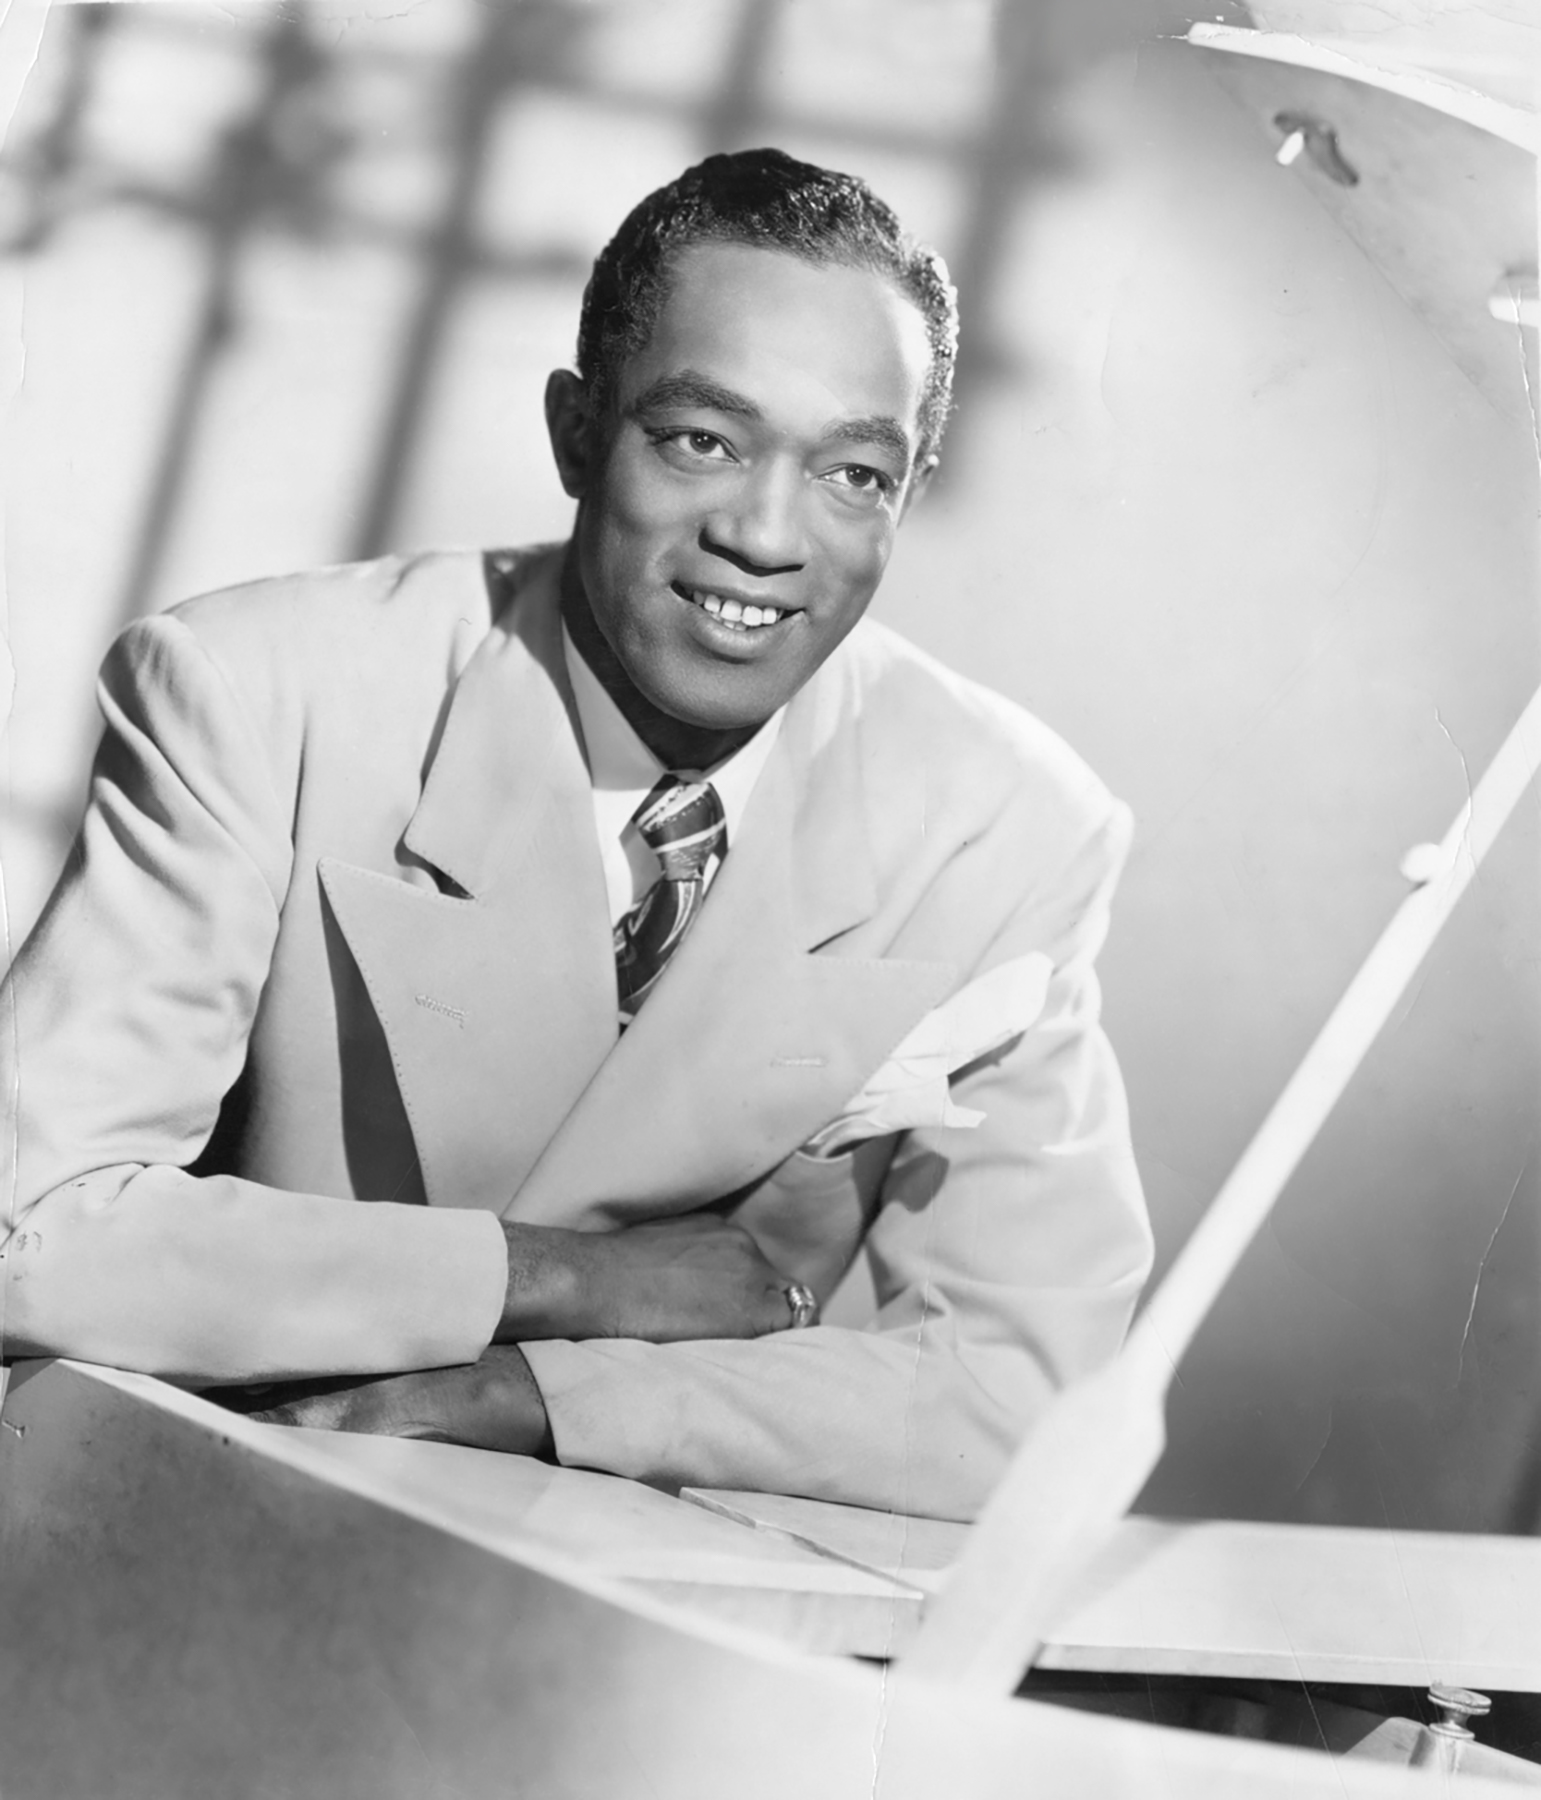 Buddy Johnson leaning on a piano smiling